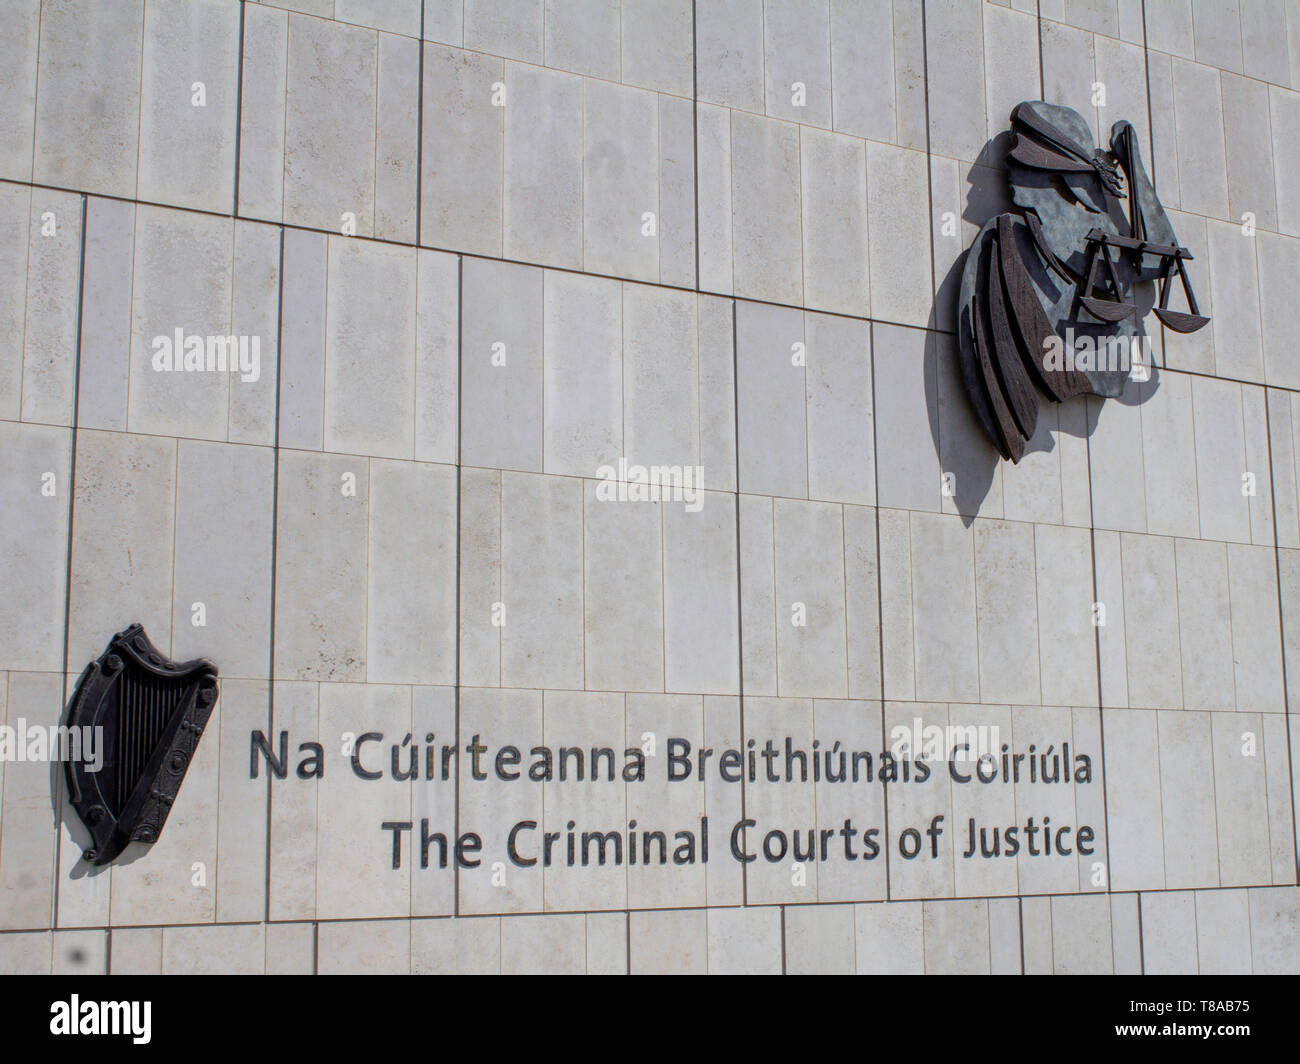 The Criminal Courts of Justice, Parkgate Street. Opened in 2010 it is the principal criminal court in Ireland. Stock Photo